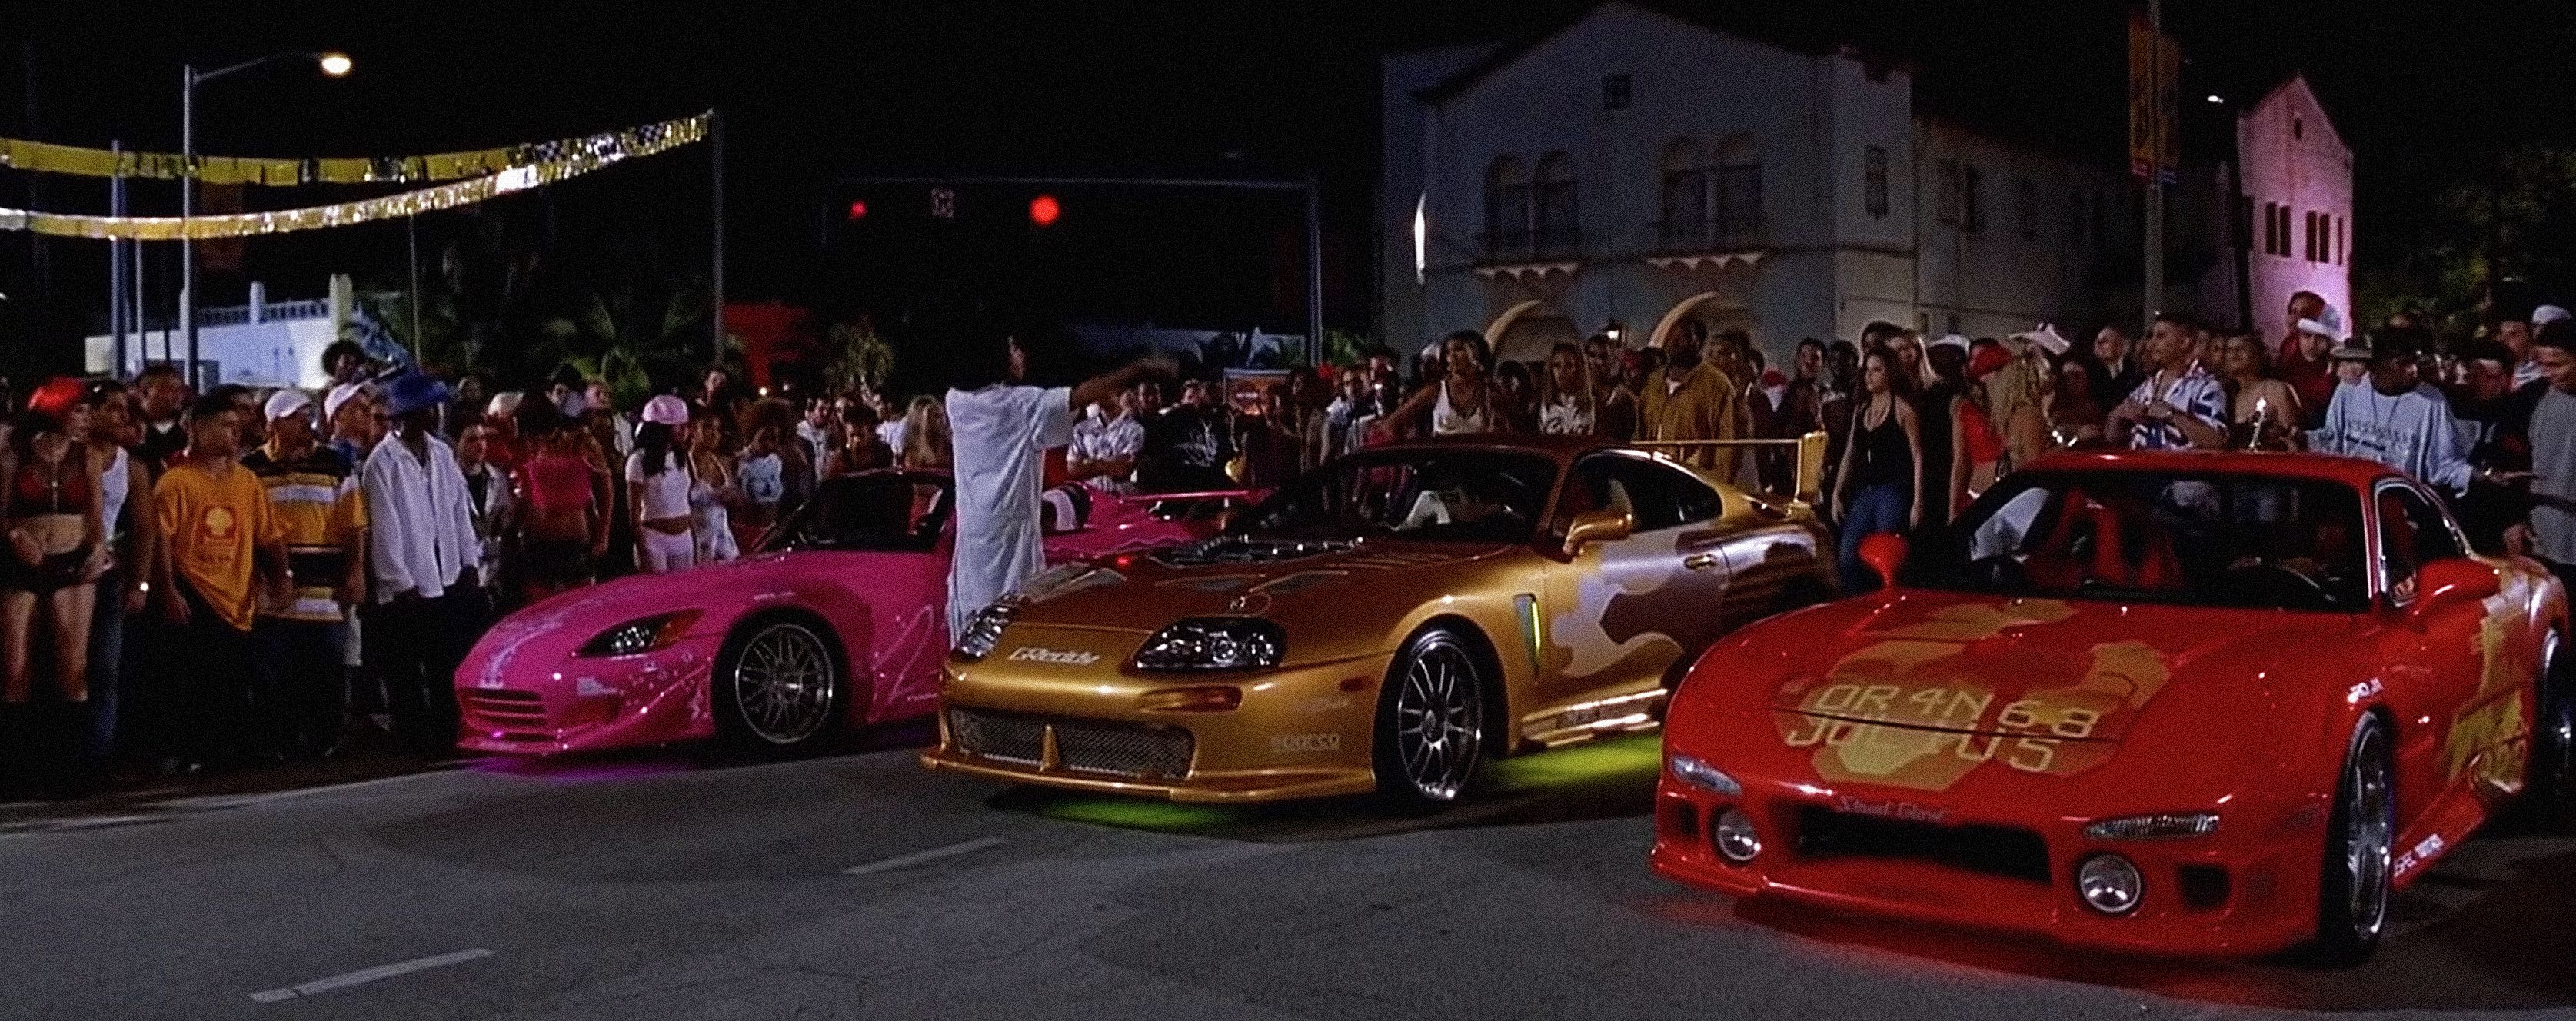 How the Fast and Furious franchise used cars to symbolize the